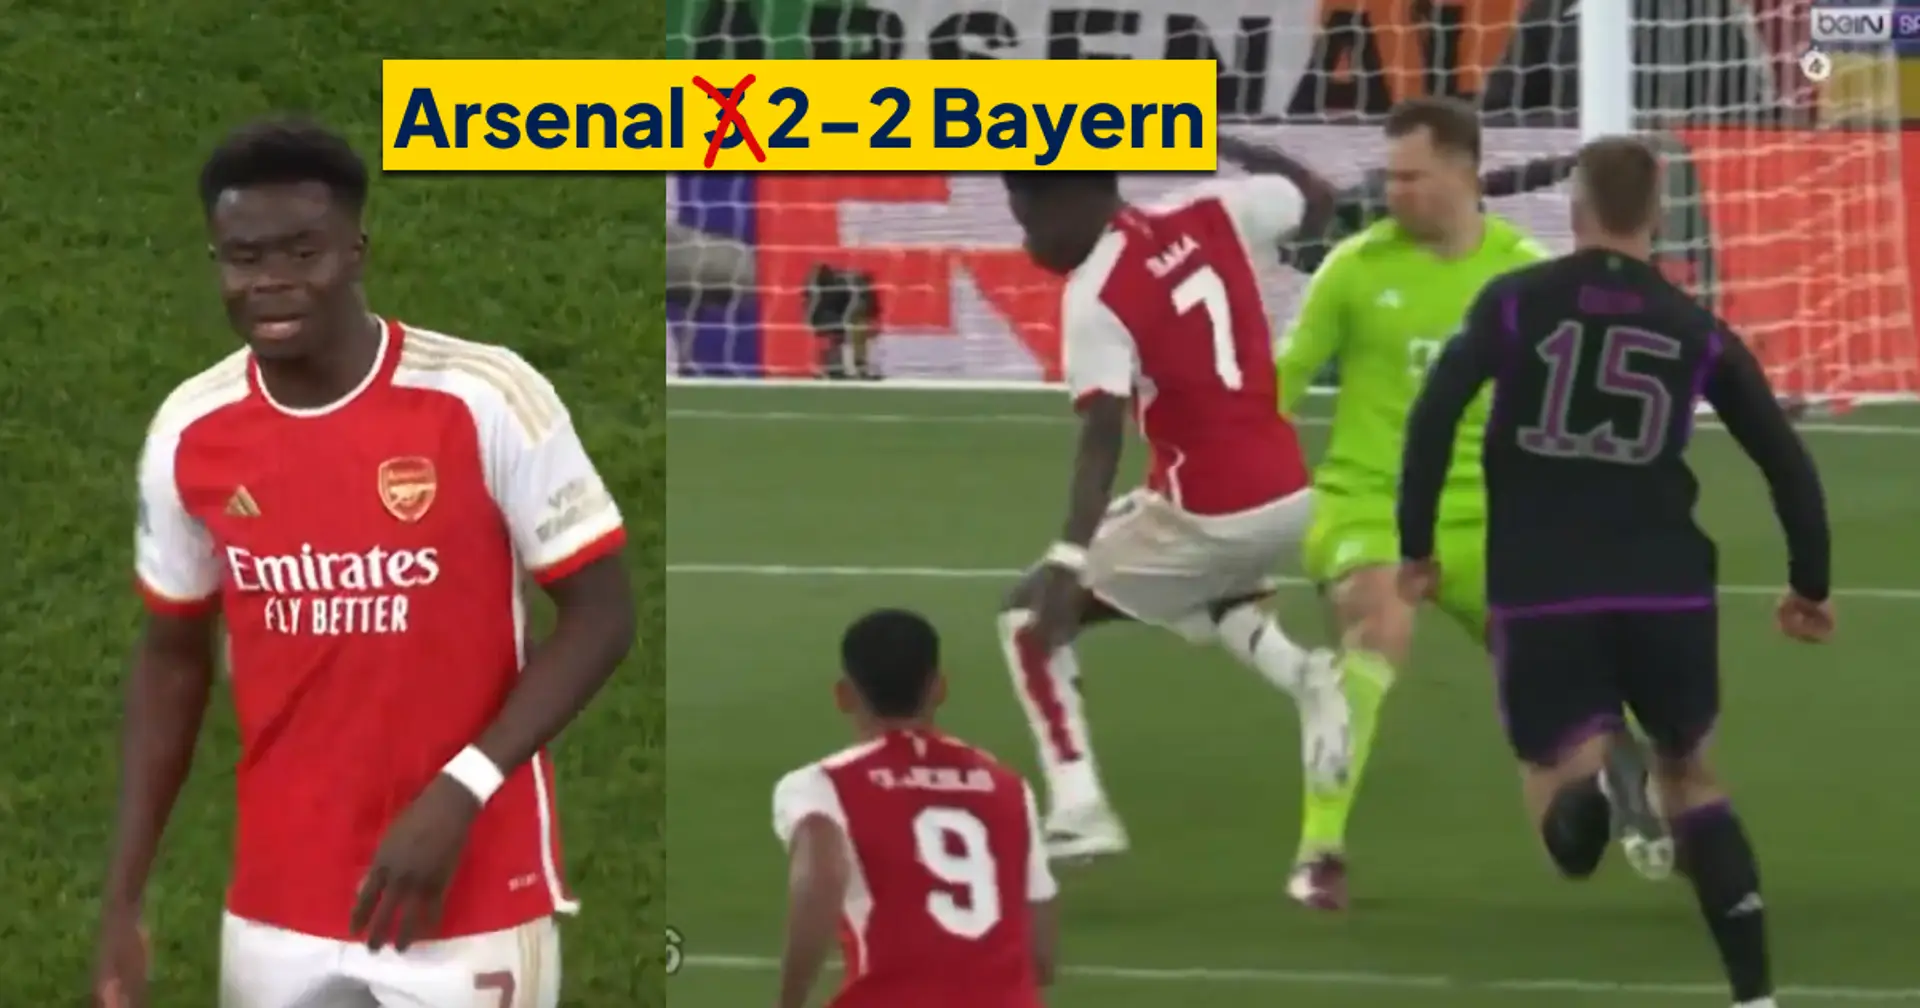 'Embarrassing': Bukayo Saka told Arsenal would've beaten Bayern if he'd stayed on his feet in Neuer episode